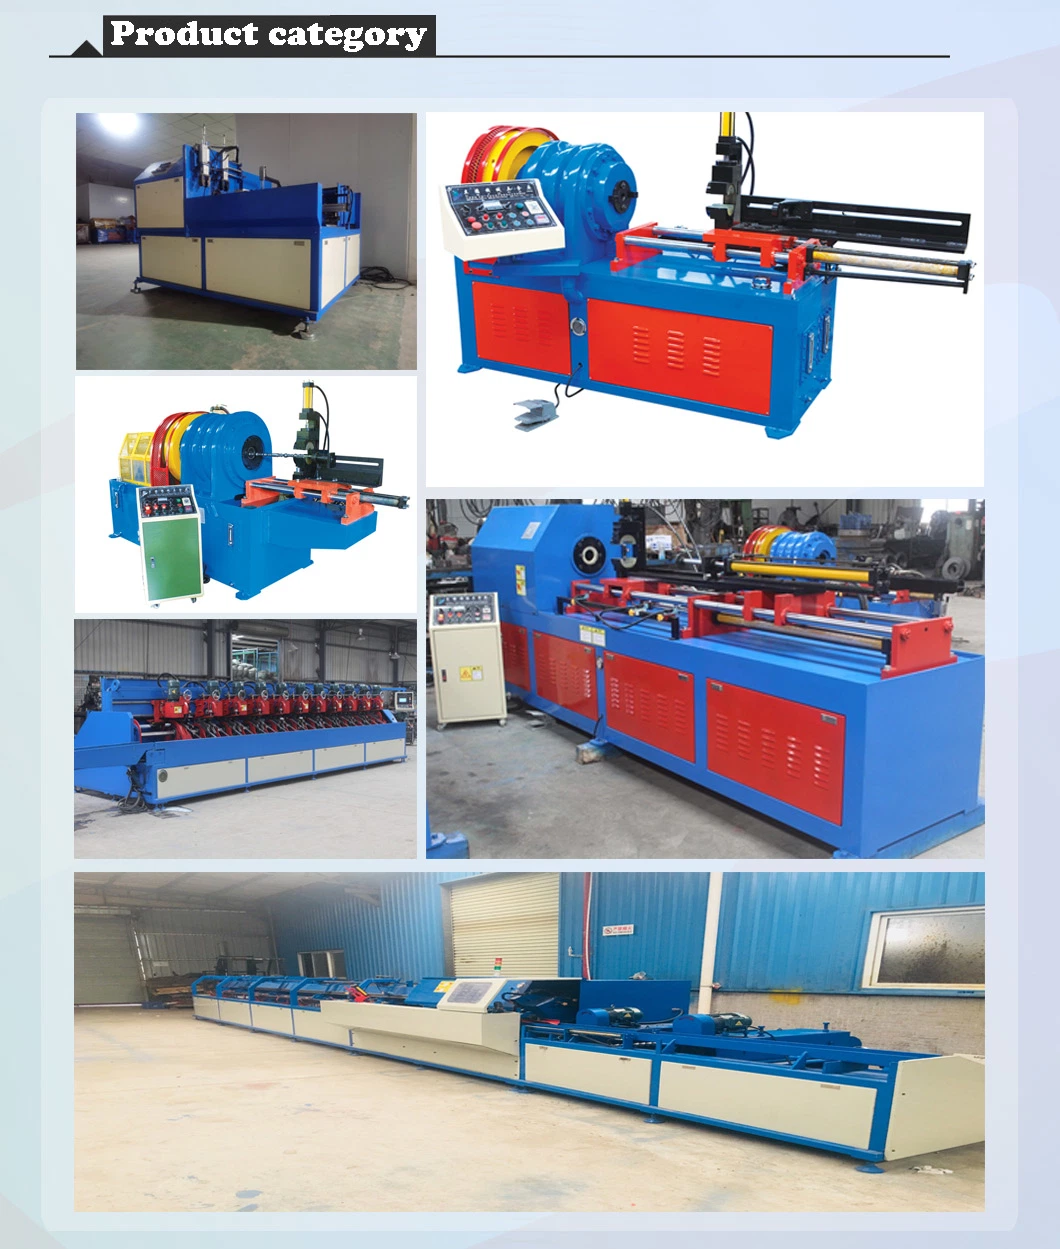 The Manufacturer Sells Fully Automatic Multi Head Pipe Cutting Machines